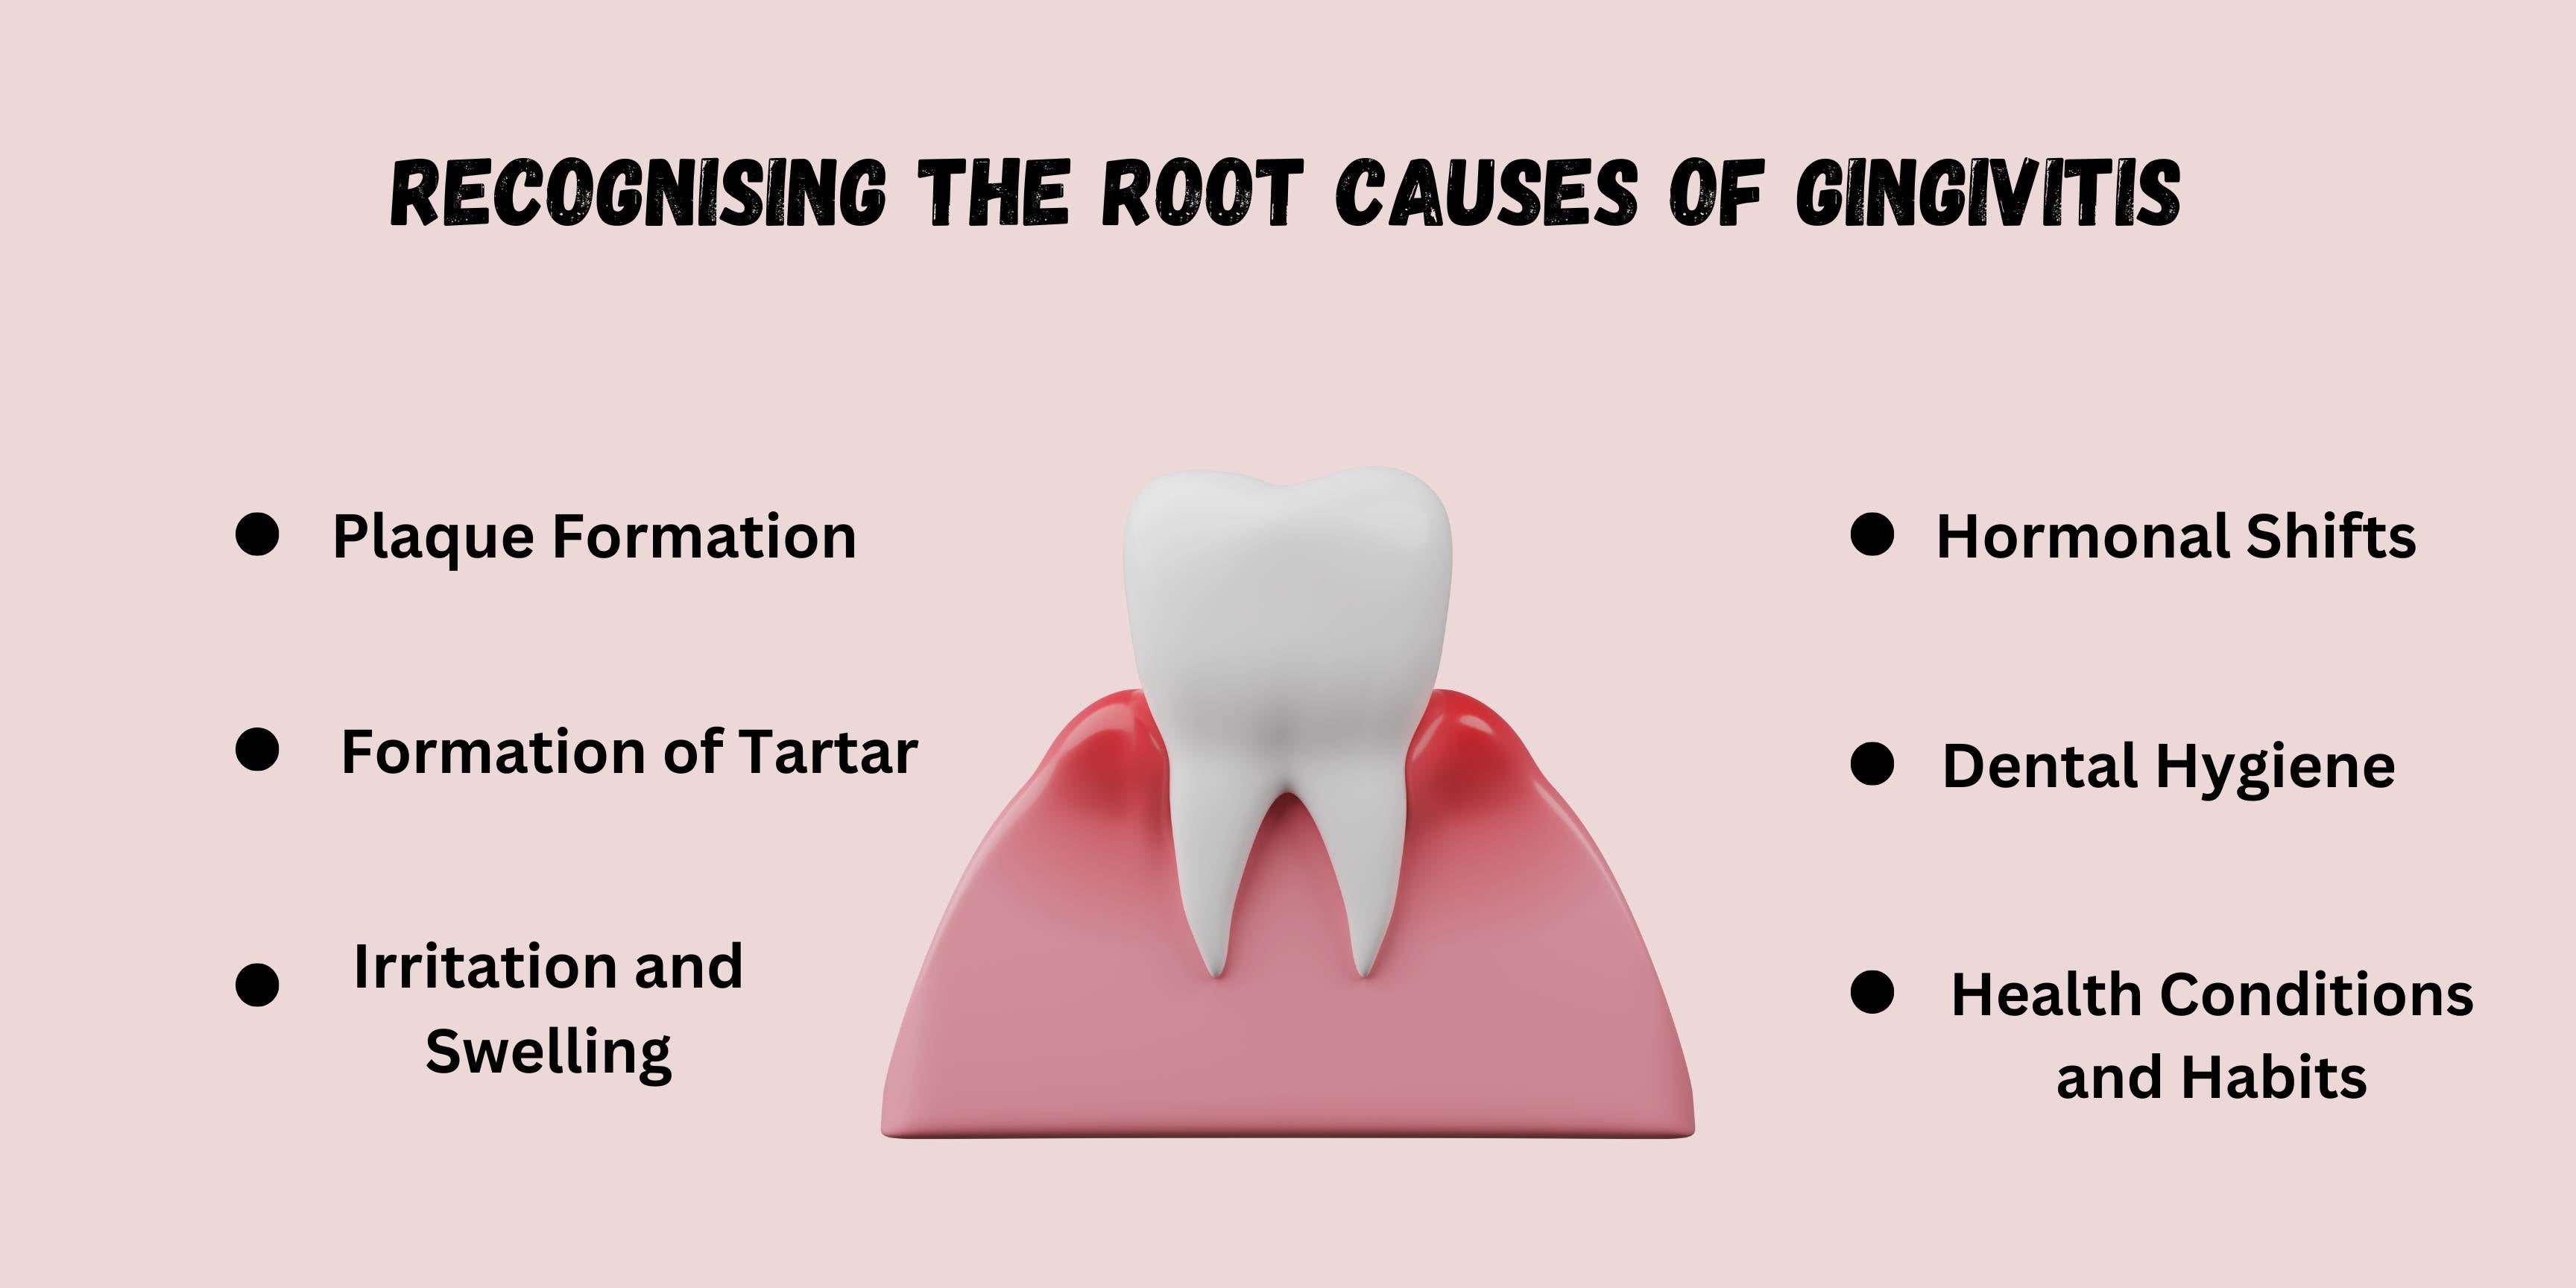 Recognising the Root Causes of Gingivitis